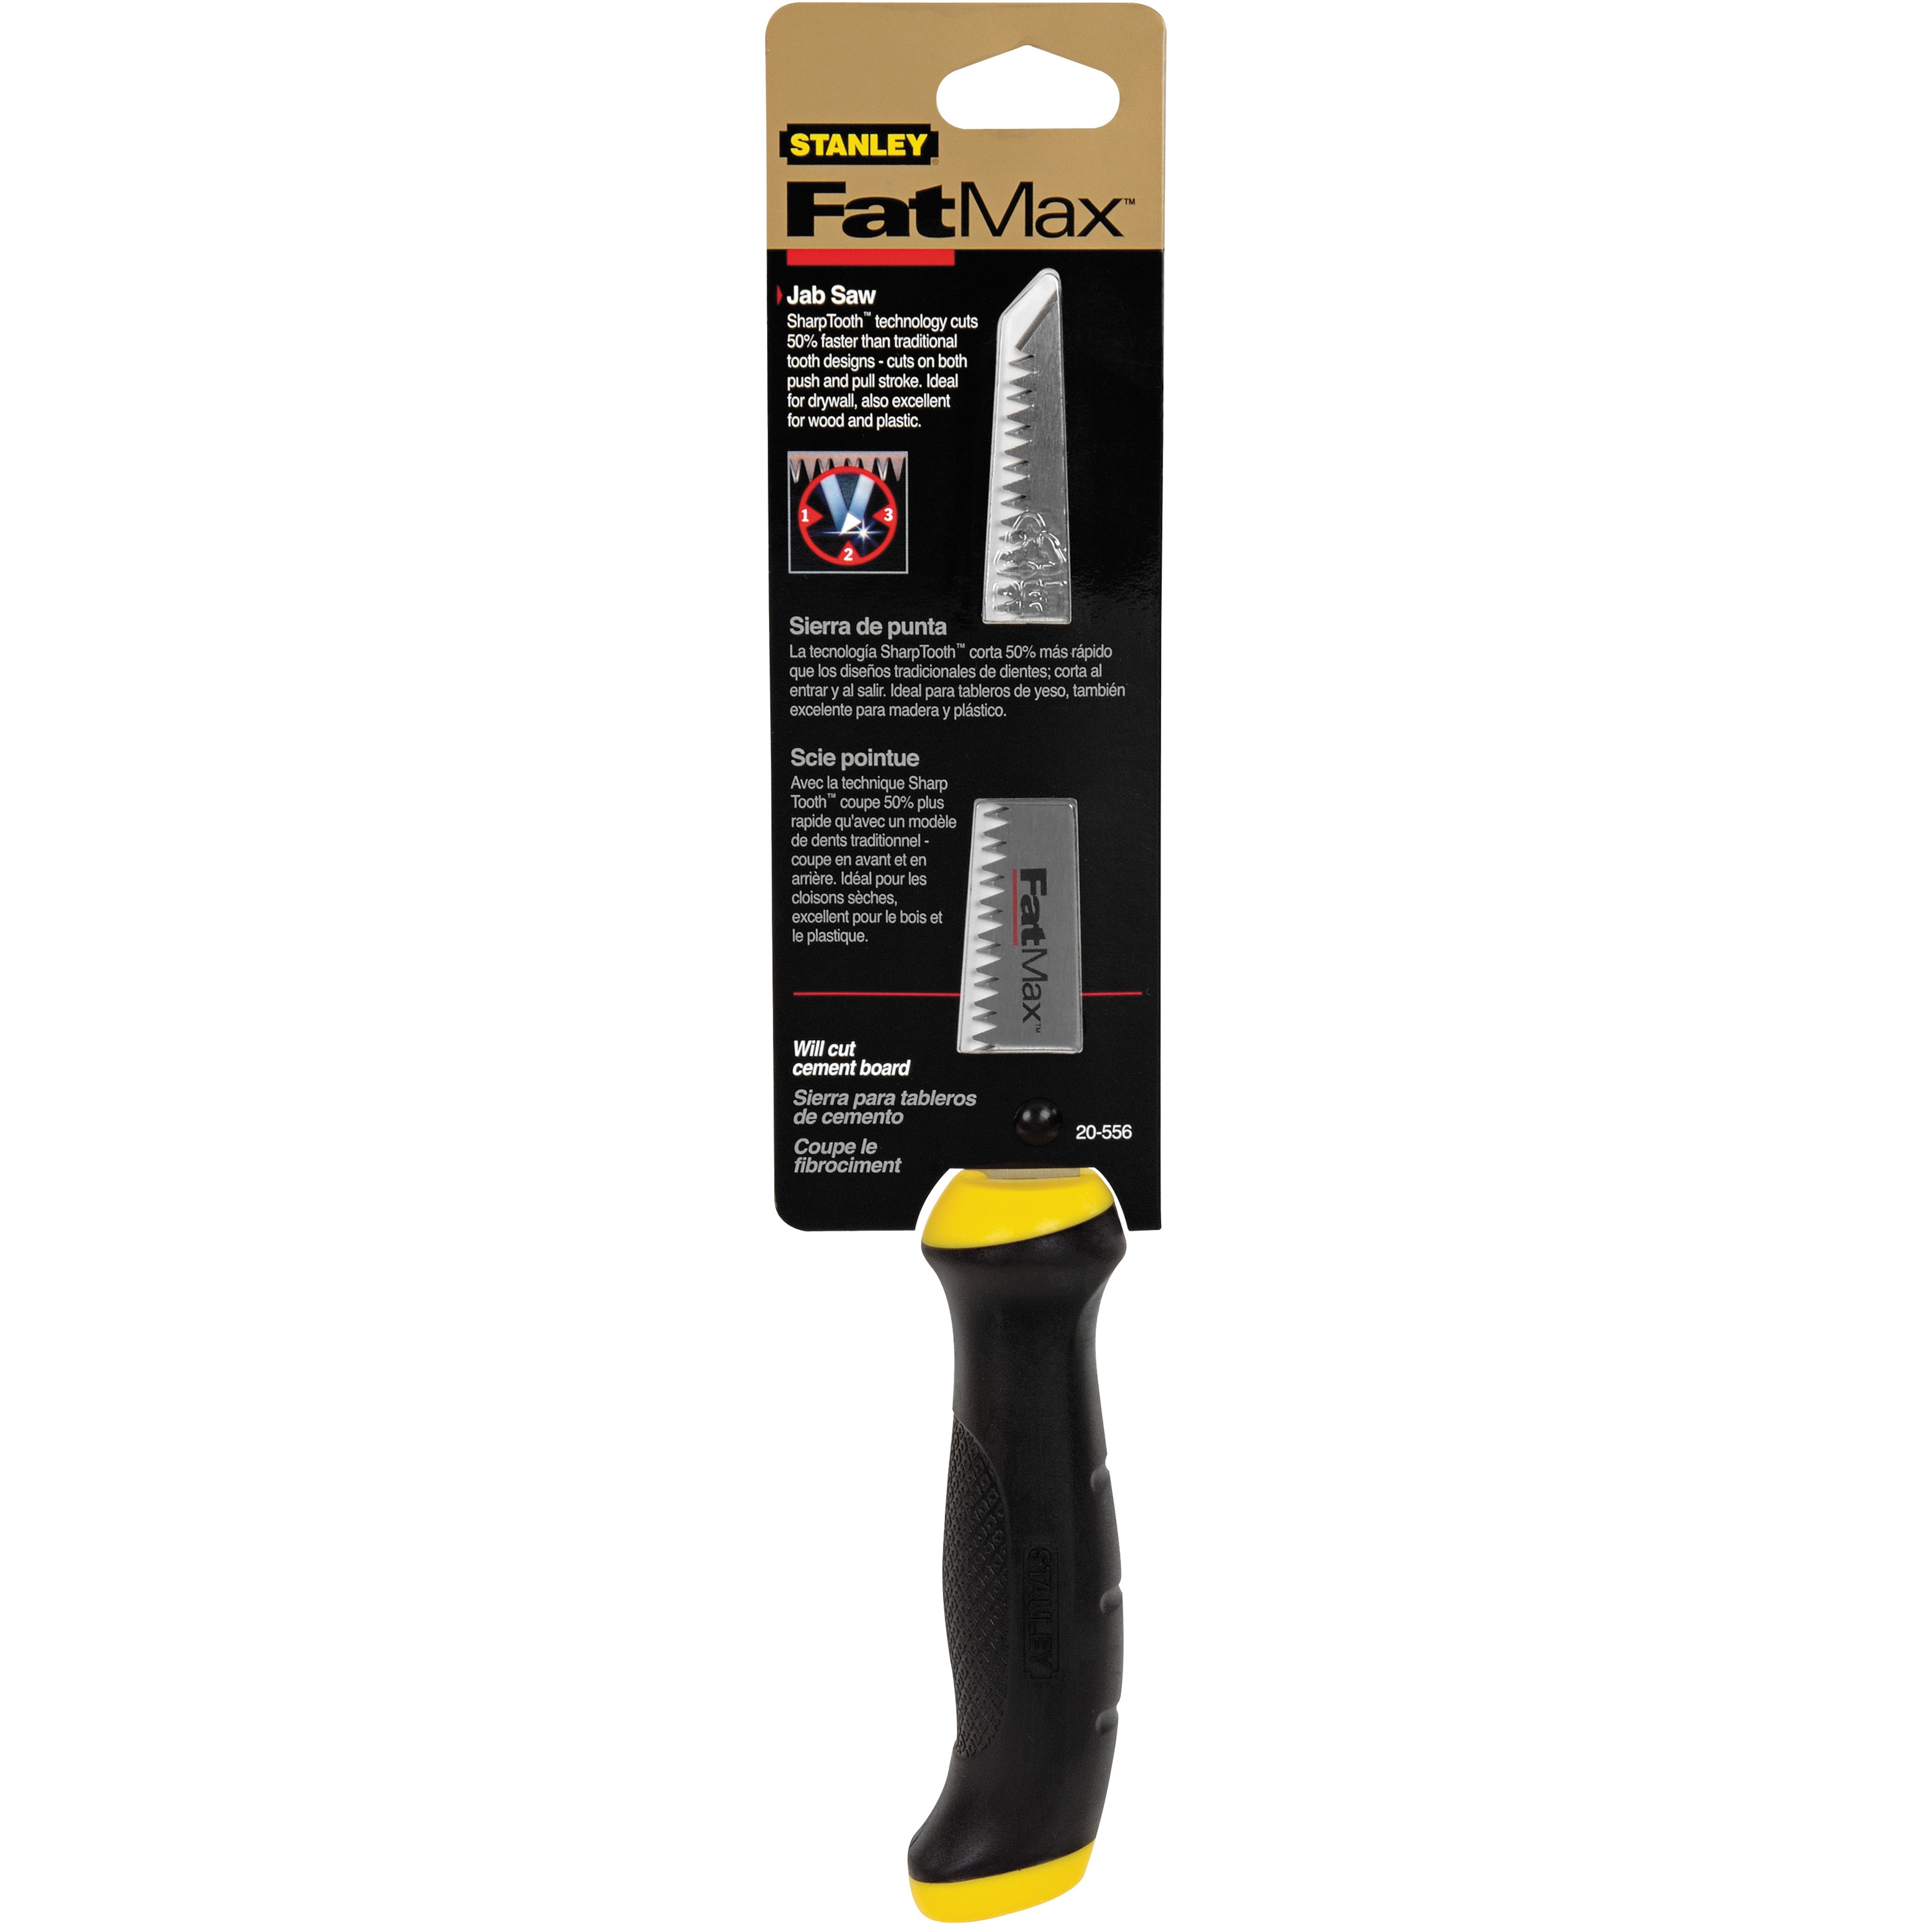 Stanley Tools - 6 in FATMAX Jab saw - 20-556